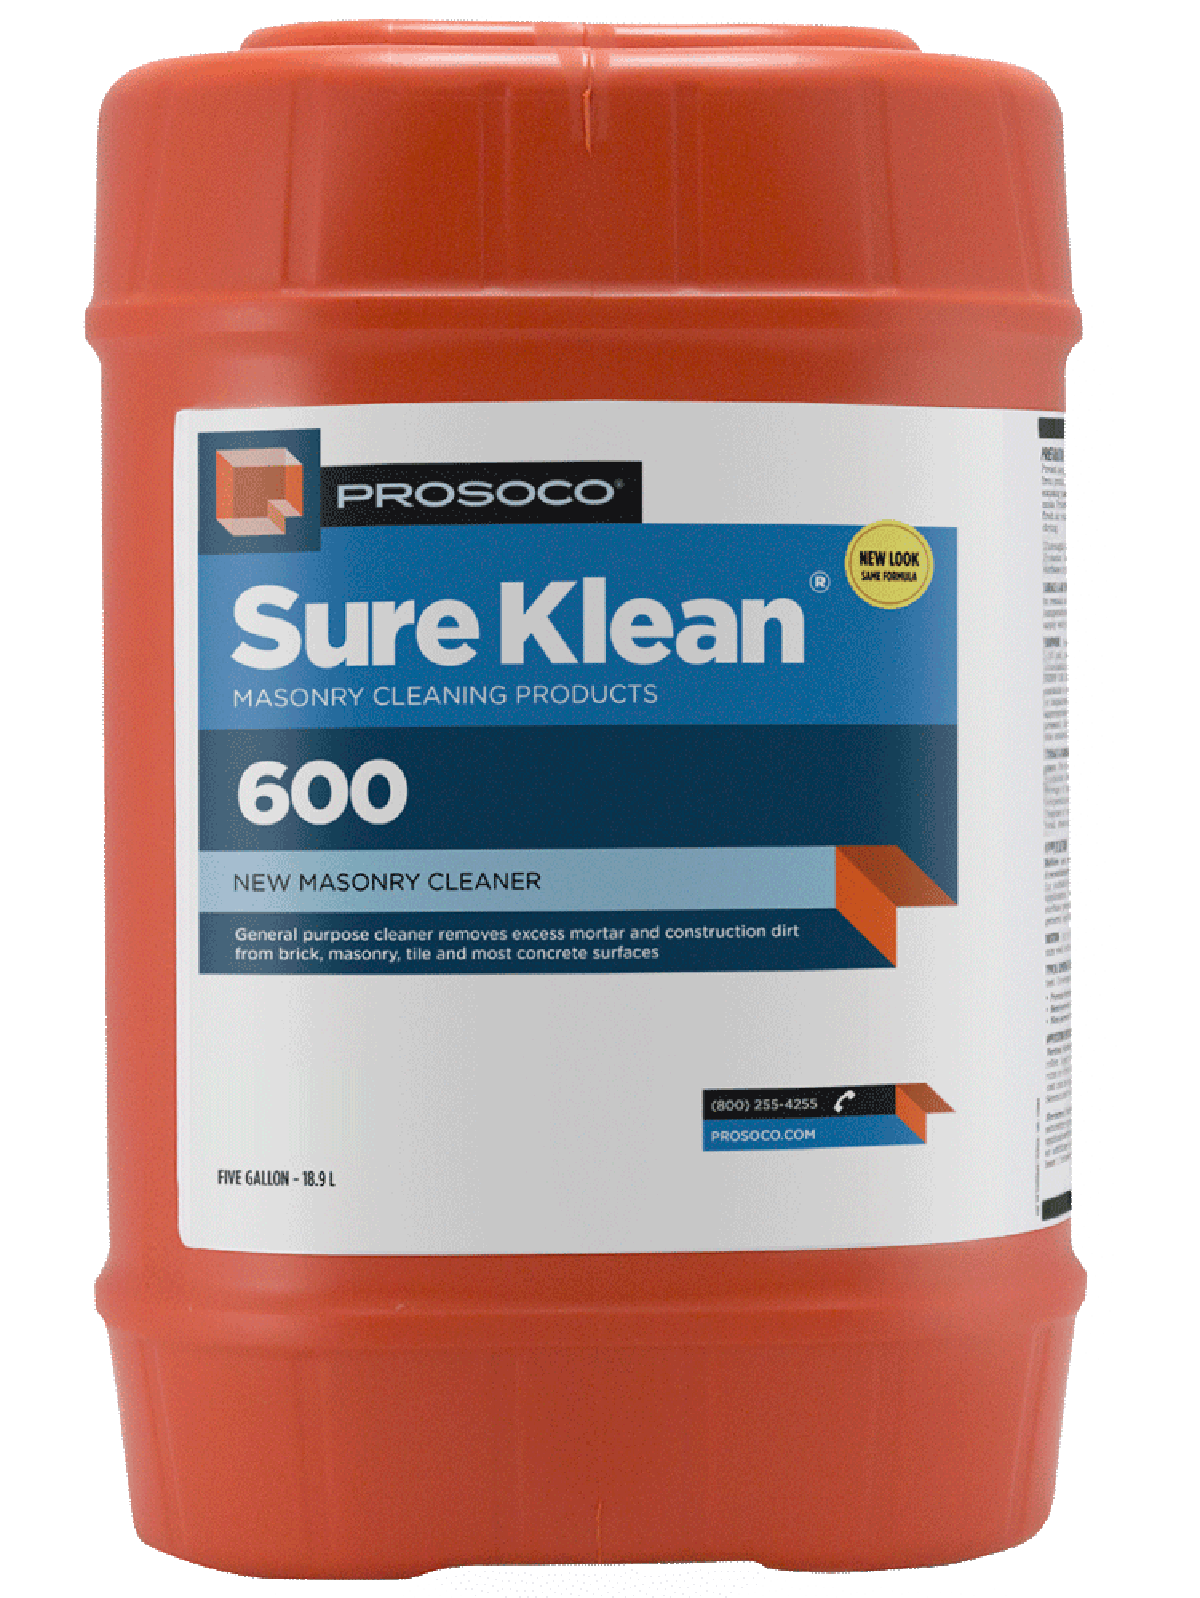 Prosoco Sure Klean 600 5Gal Masonry Cleaner - Utility and Pocket Knives